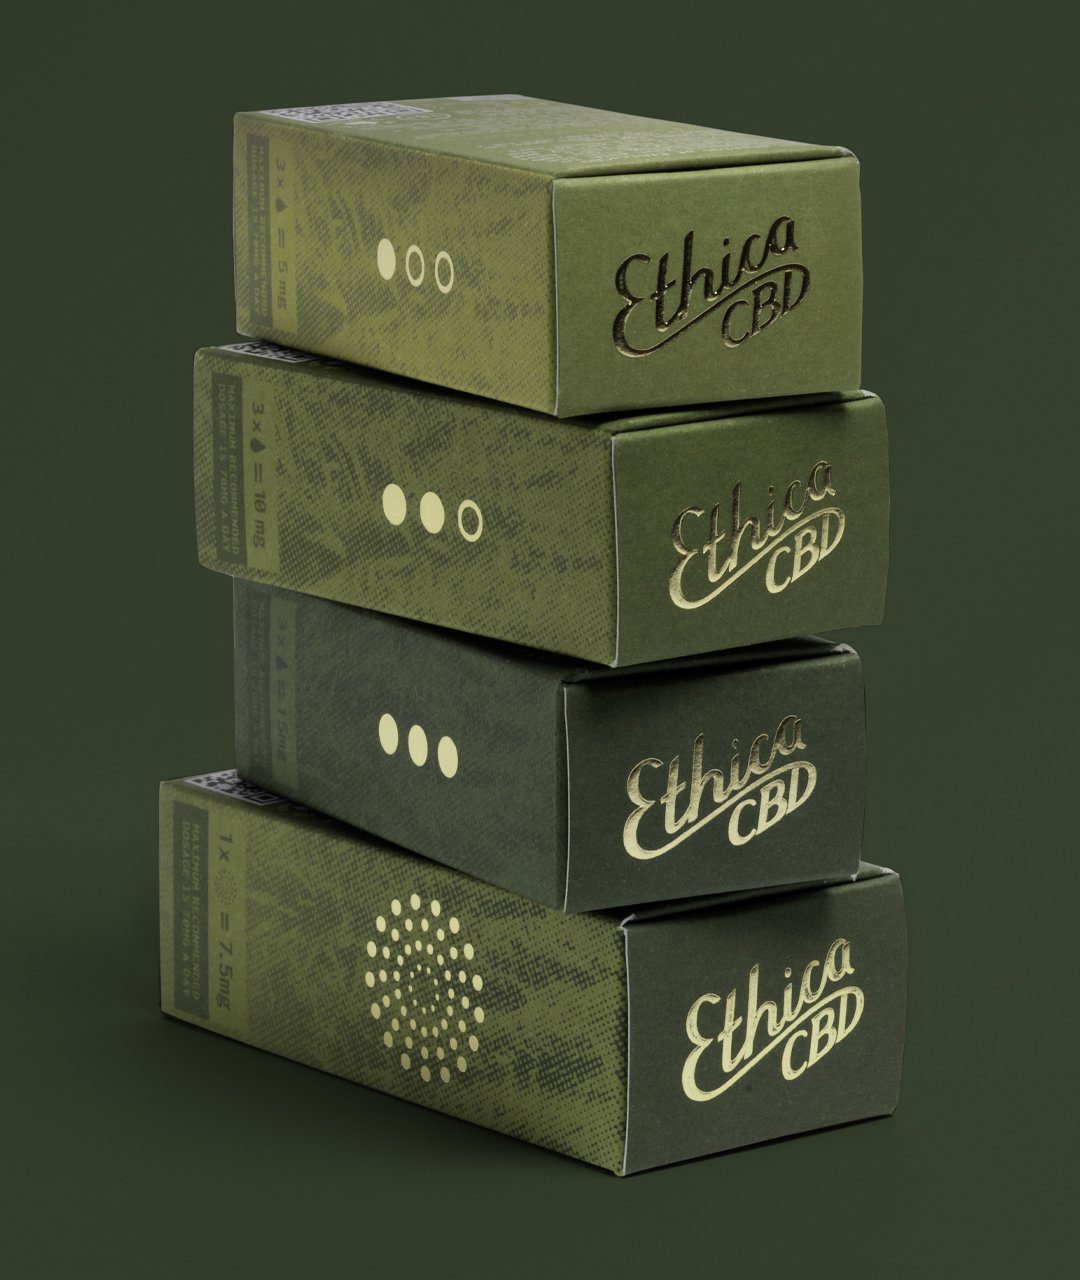 EthicaCBD Wholeplant box design by Kingdom and Sparrow